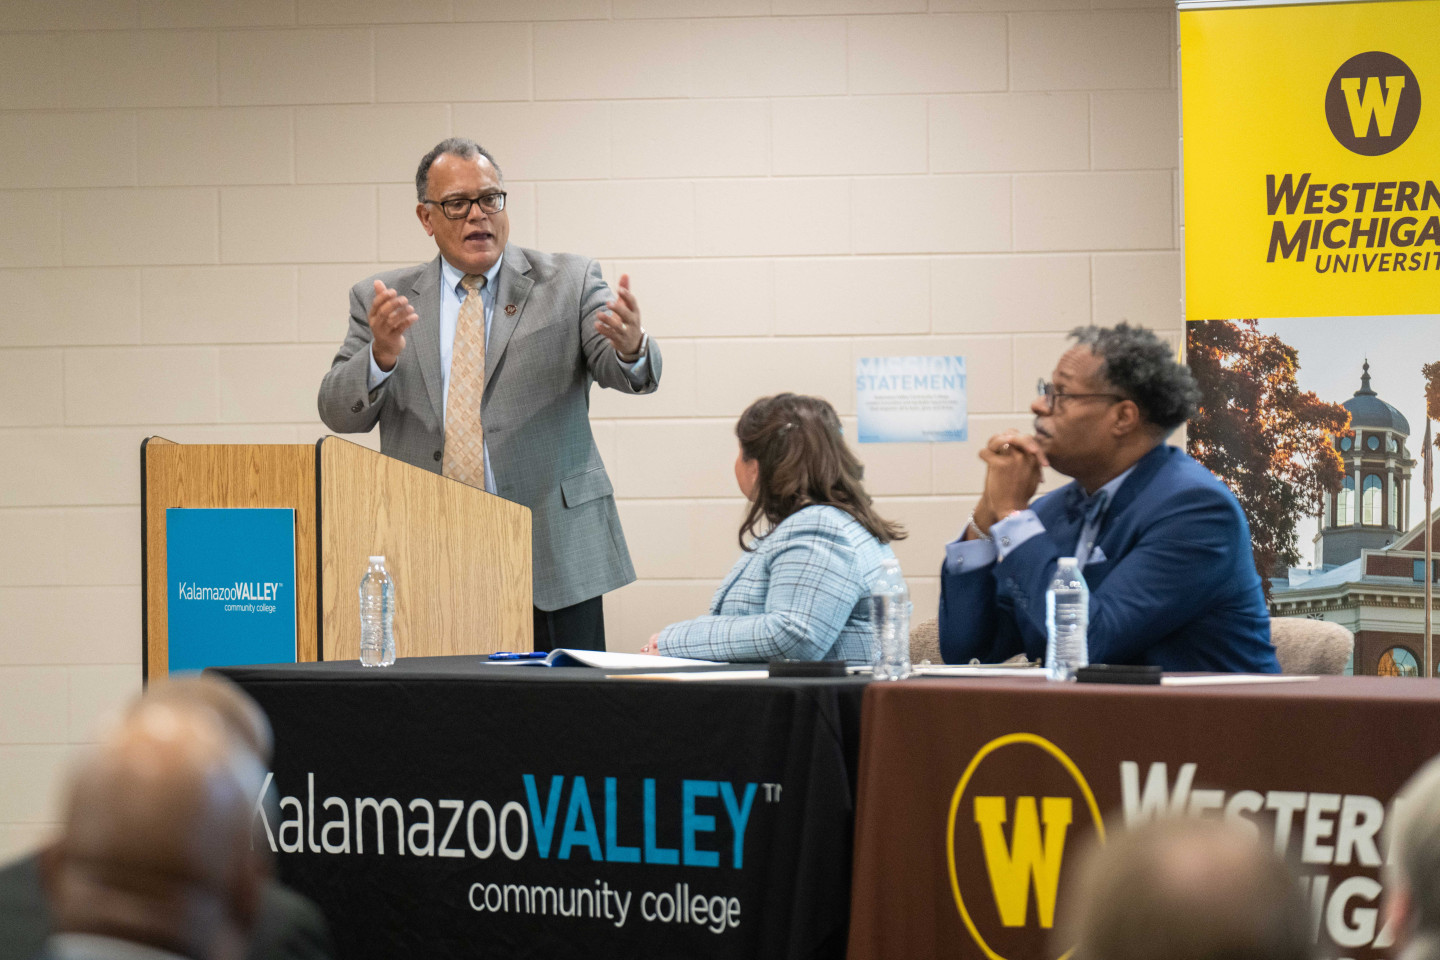 President Montgomery speaking at the podium at Kalamazoo Valley Community College's Texas Township Campus.